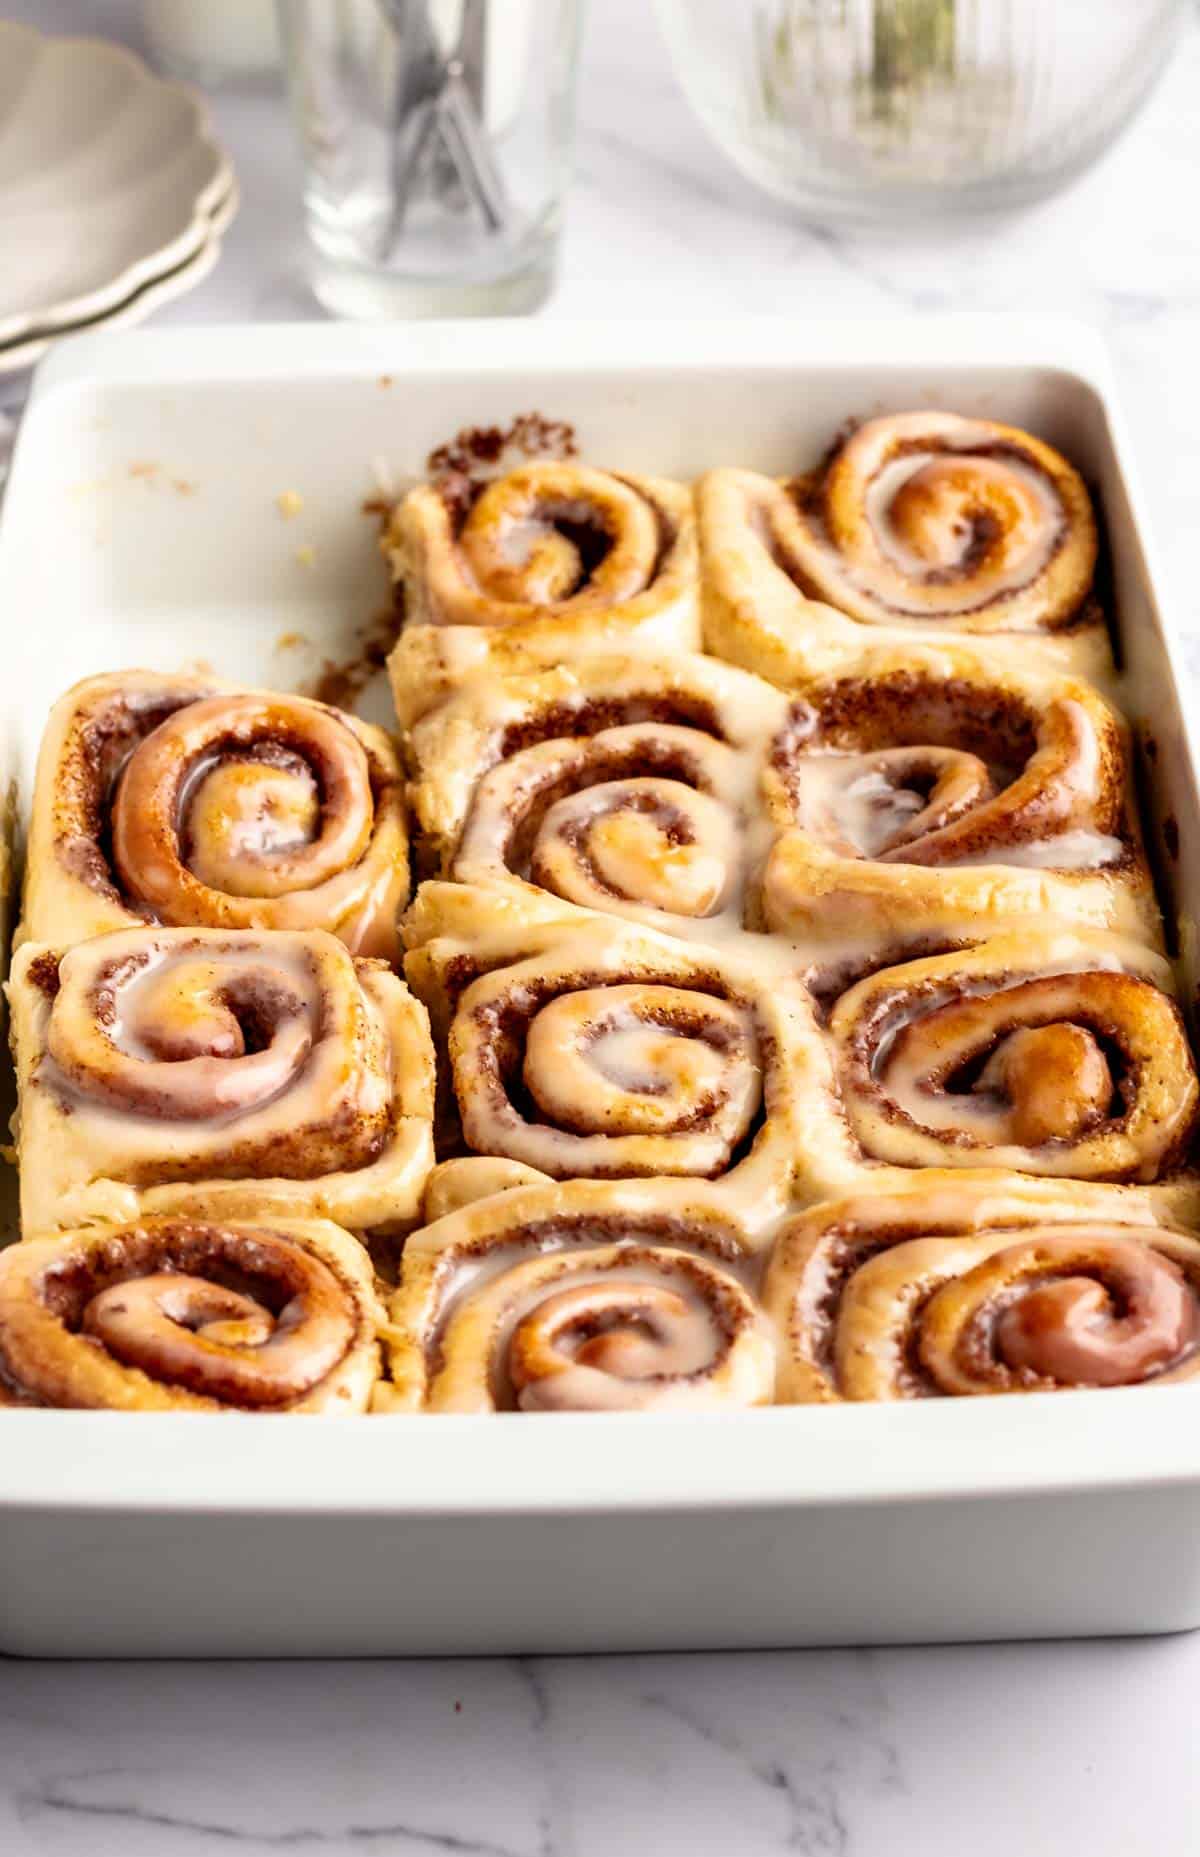 Cinnamon rolls with heavy cream in a baking pan.